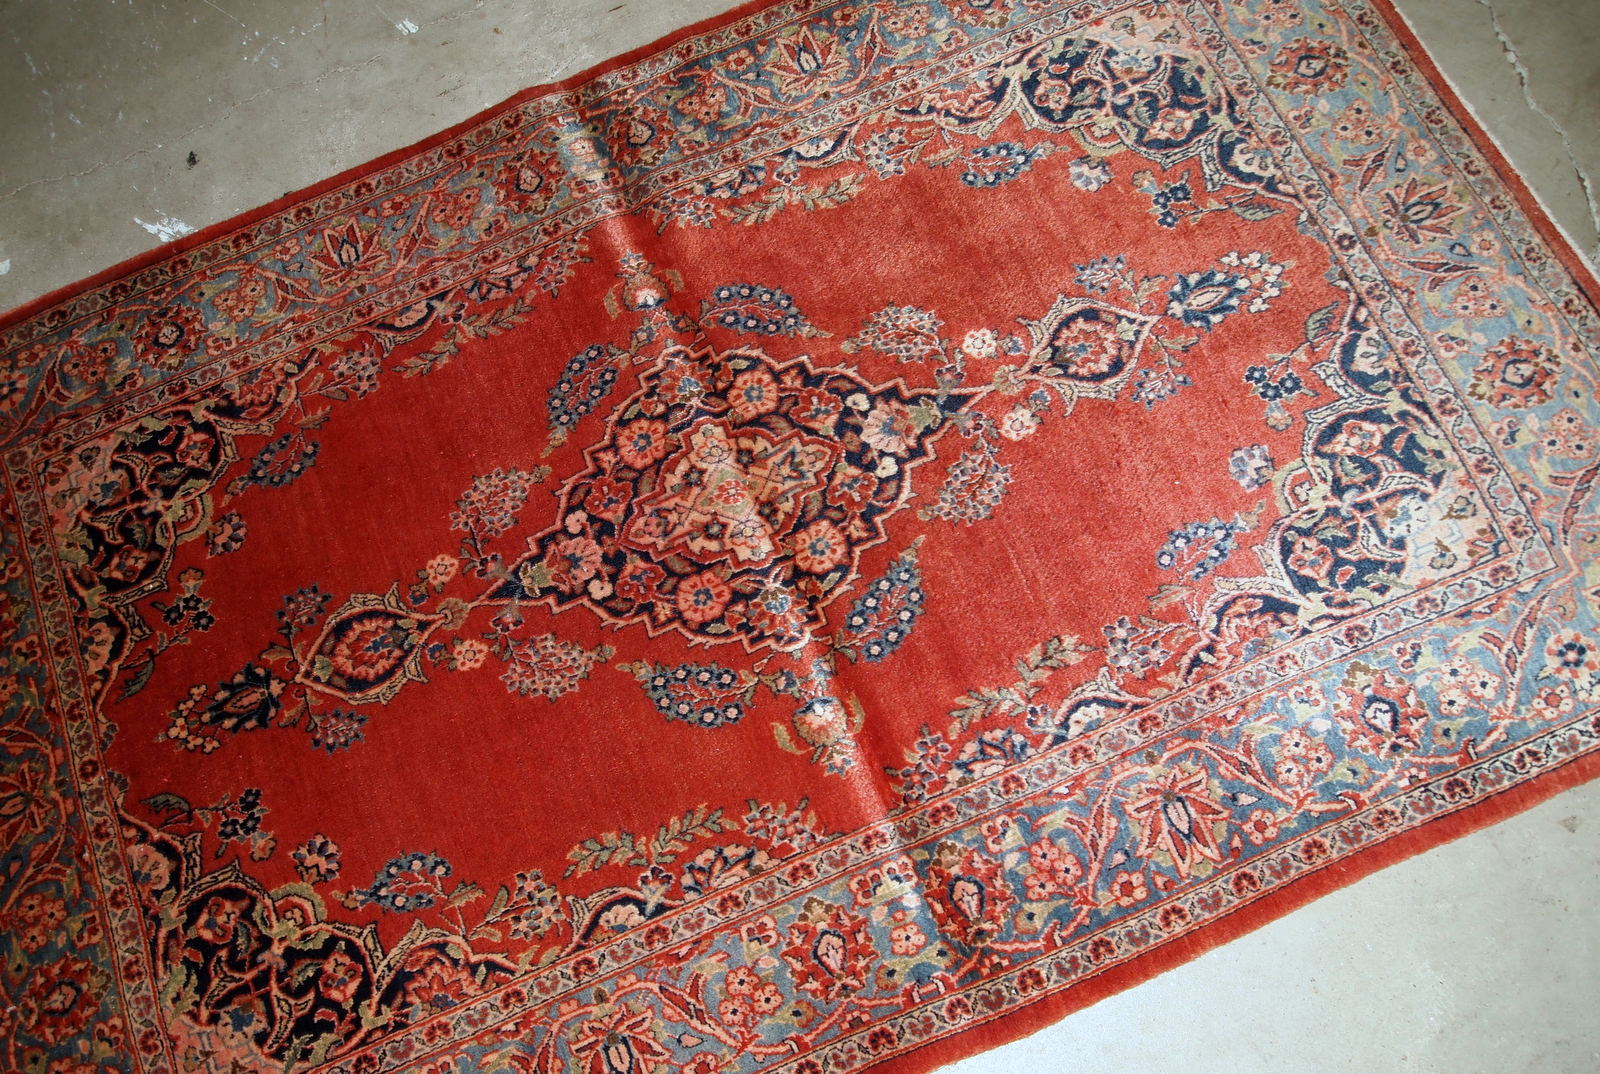 Handmade antique Persian Sarouk rug in original good condition. The rug is from the beginning of 20th century made in bright red wool. 